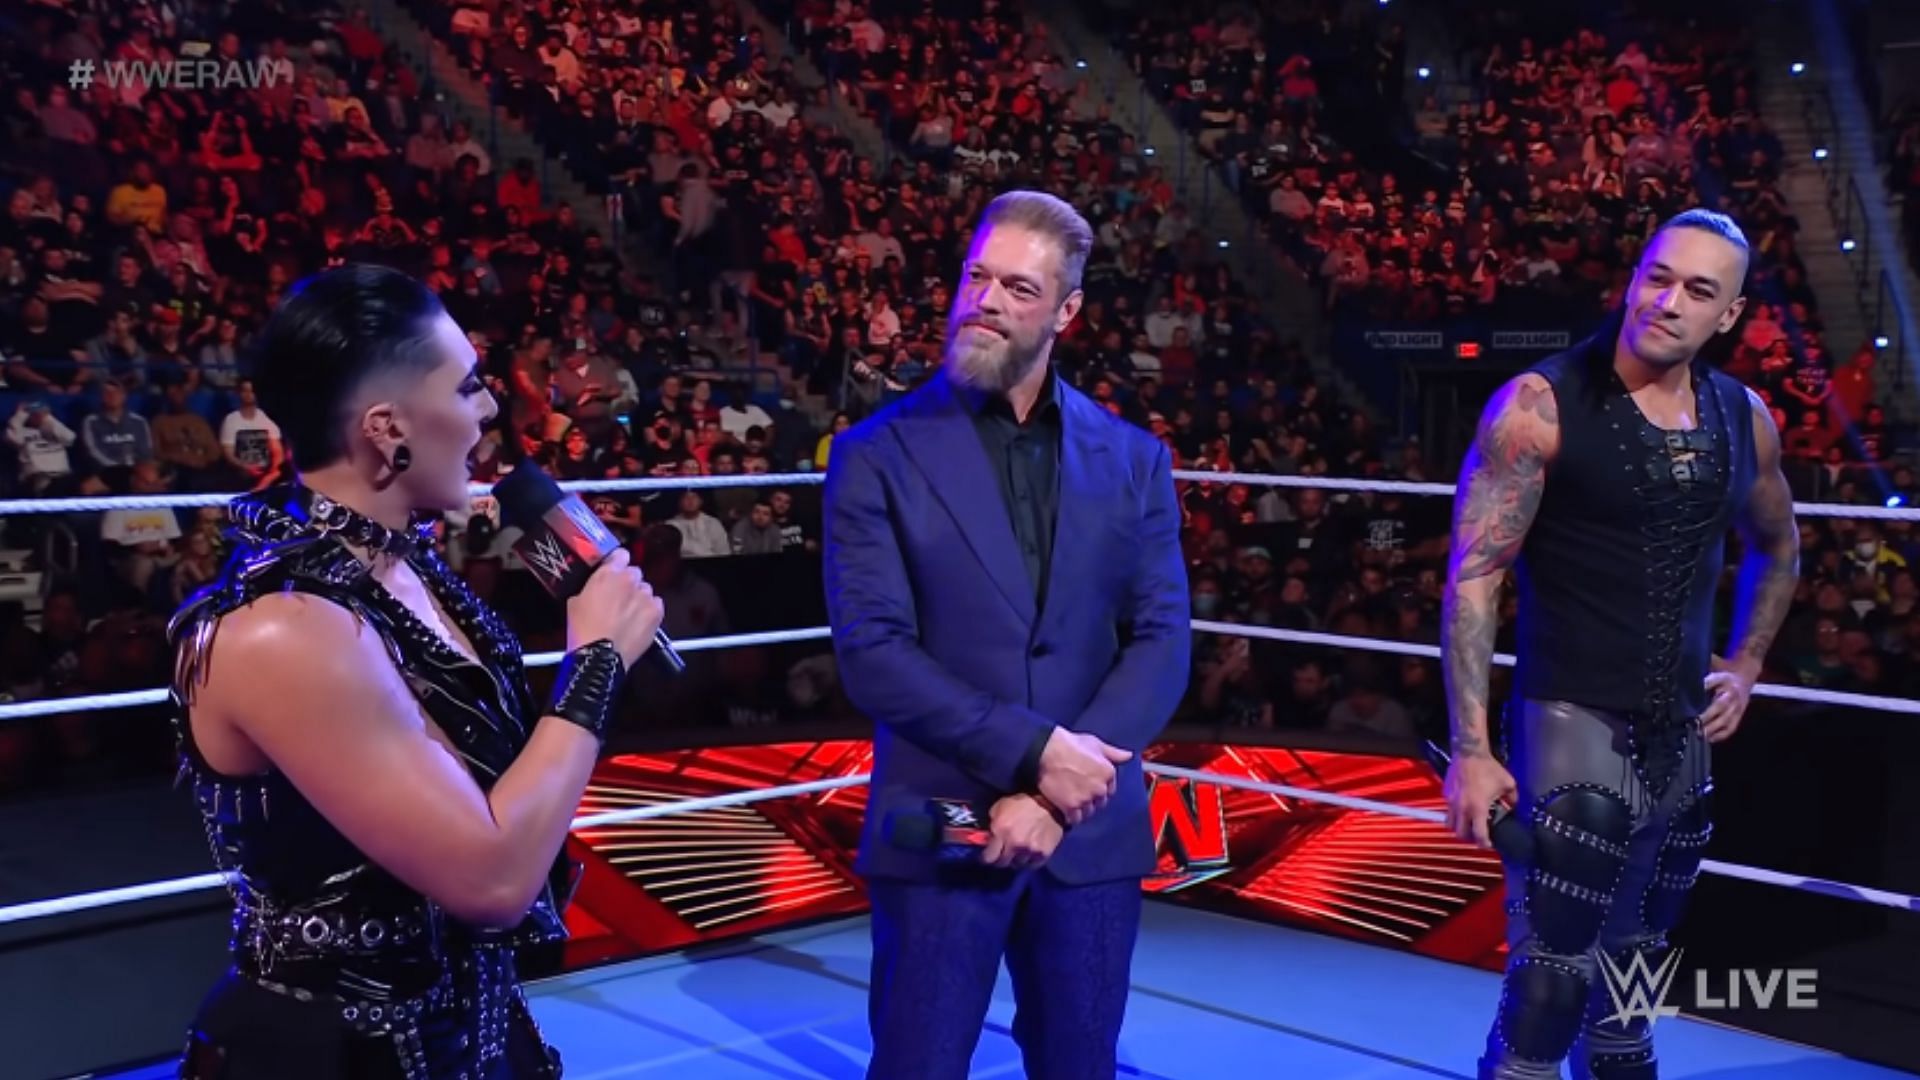 The Judgment Day has featured prominently on WWE RAW recently.